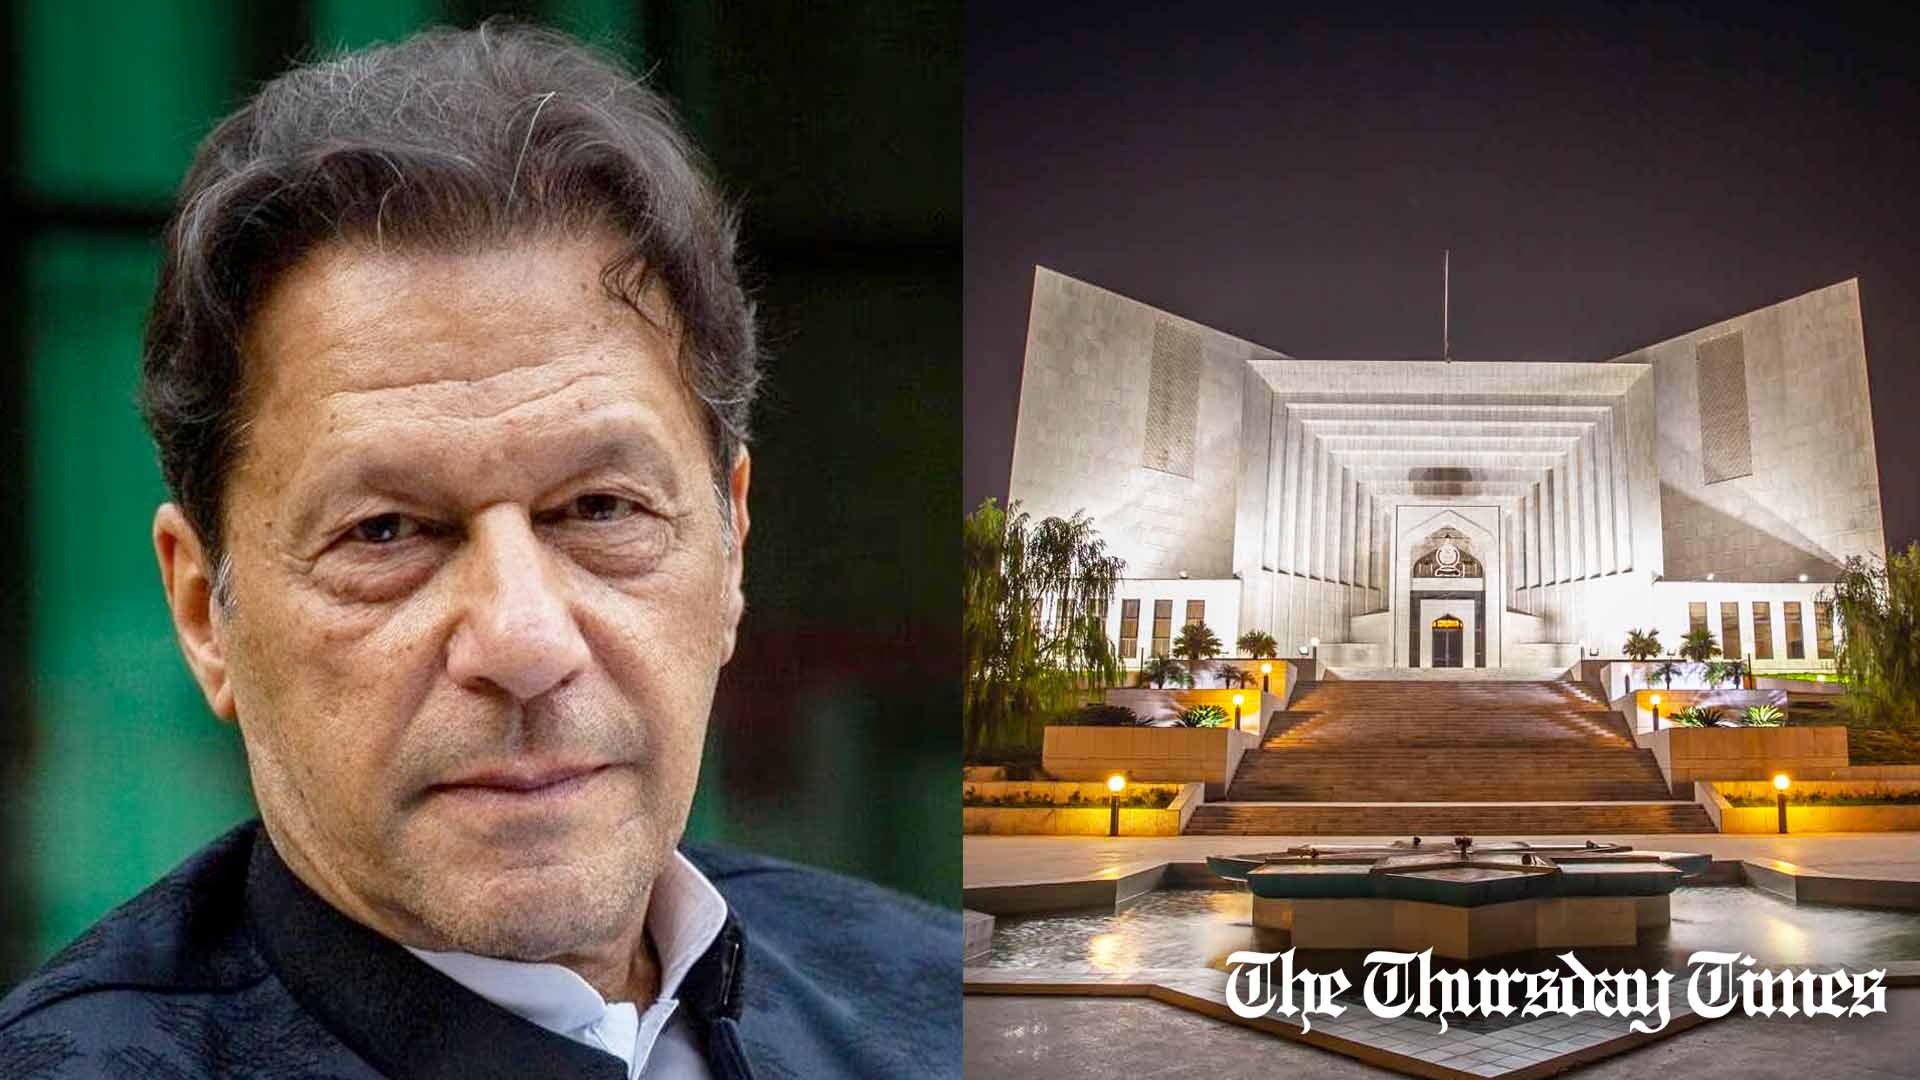 A combination file photo is shown of PTI chairman Imran Khan alongside the Supreme Court of Pakistan at Islamabad. — FILE/THE THURSDAY TIMES